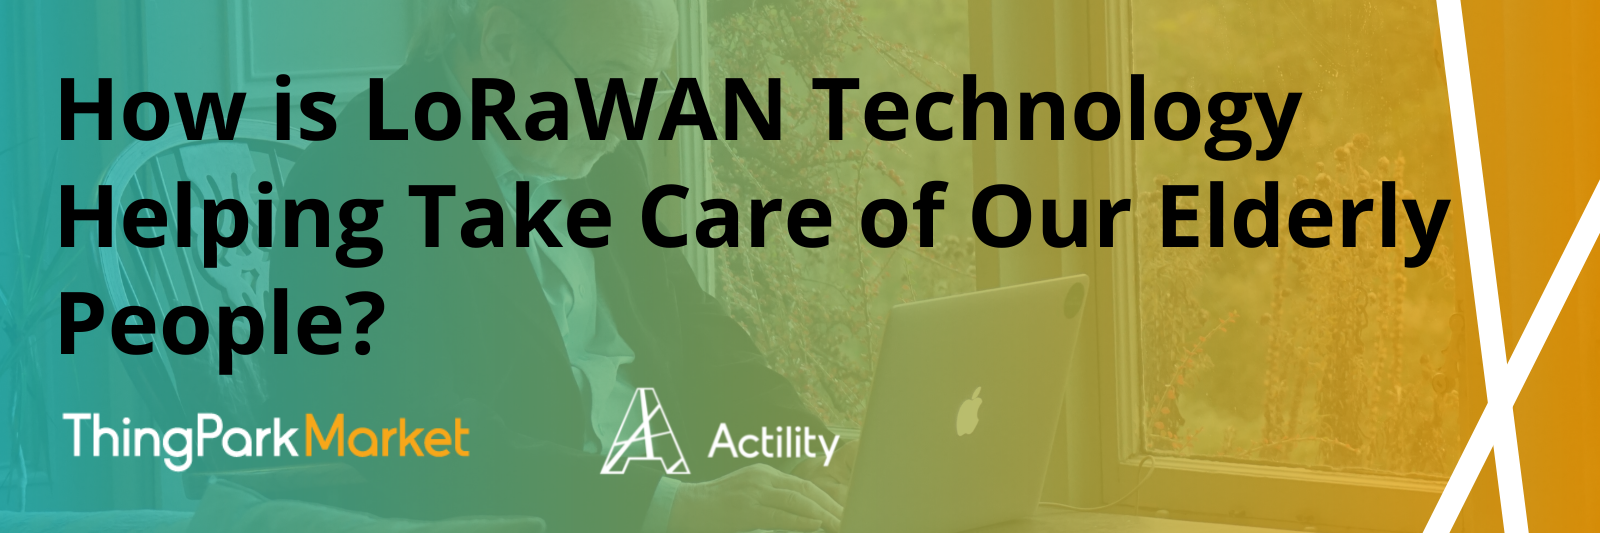 How is LoRaWAN Technology Helping Take Care of Our Elderly People?